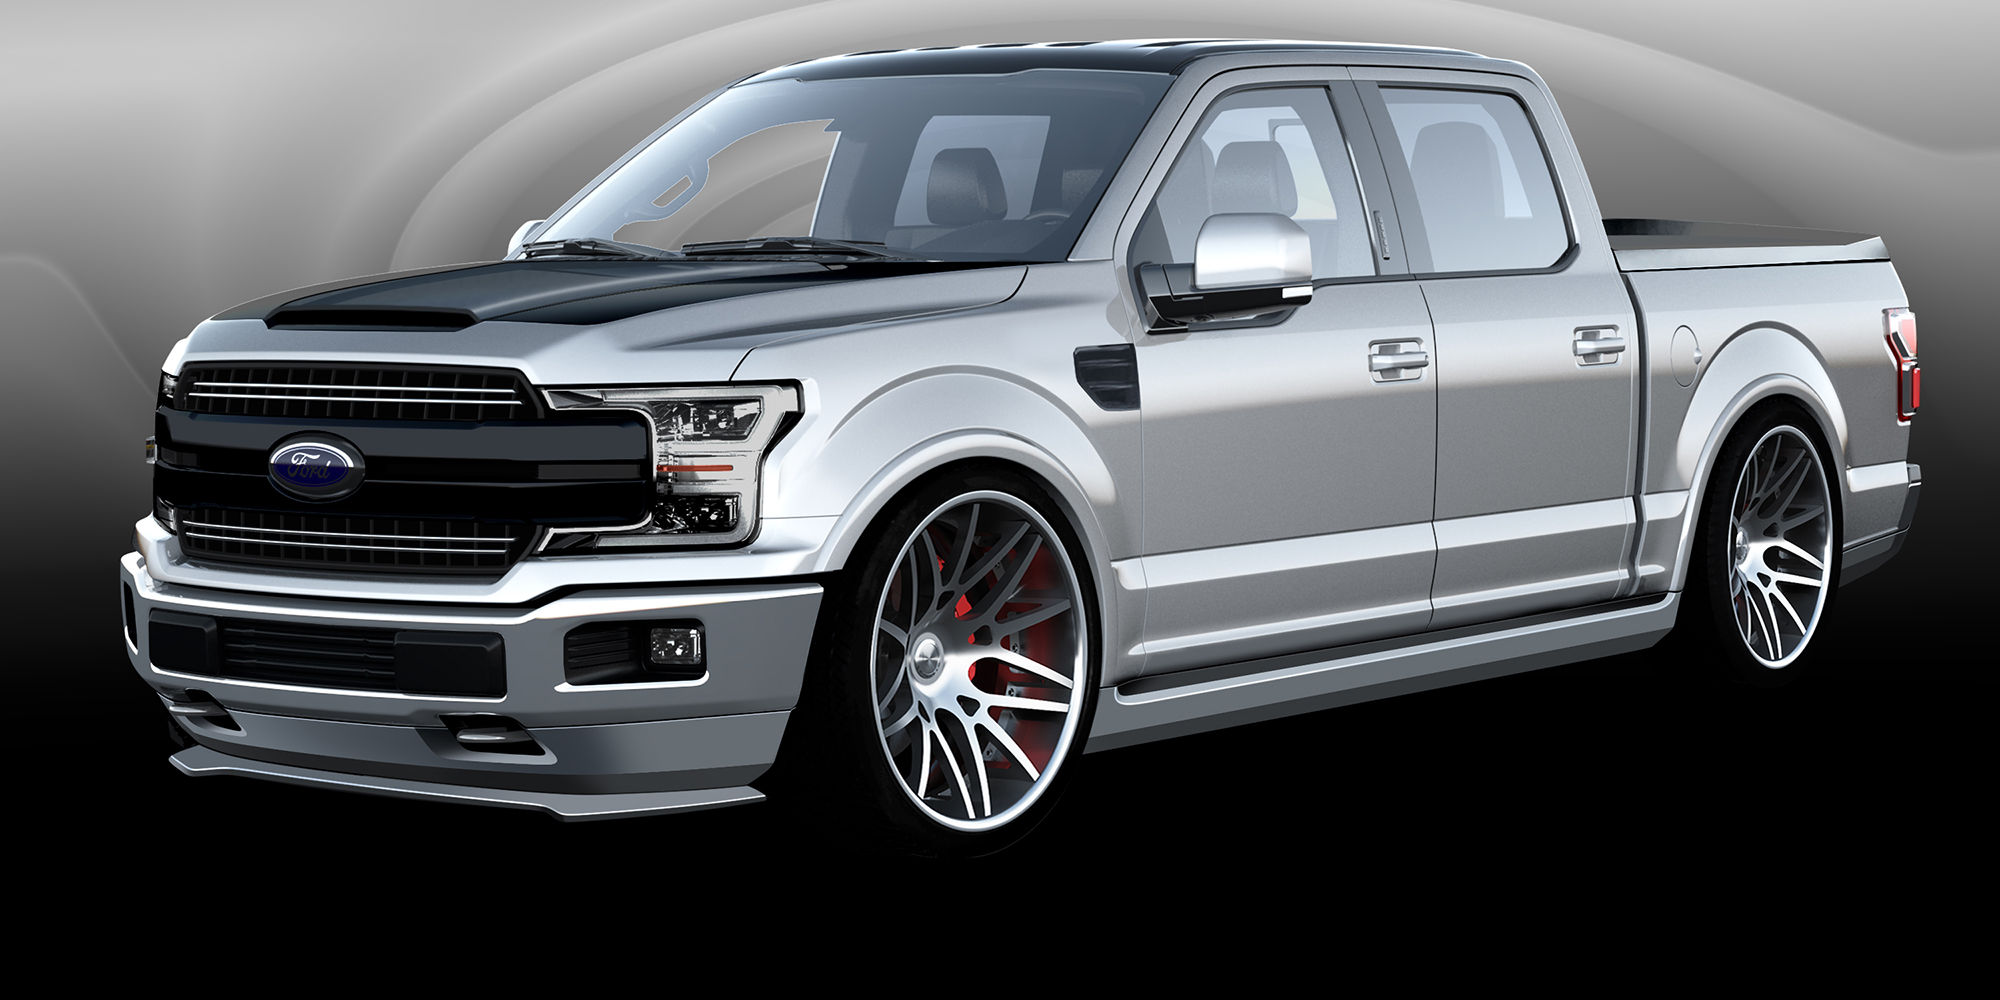 Ford reveals special F Series trucks and SUVs for SEMA 